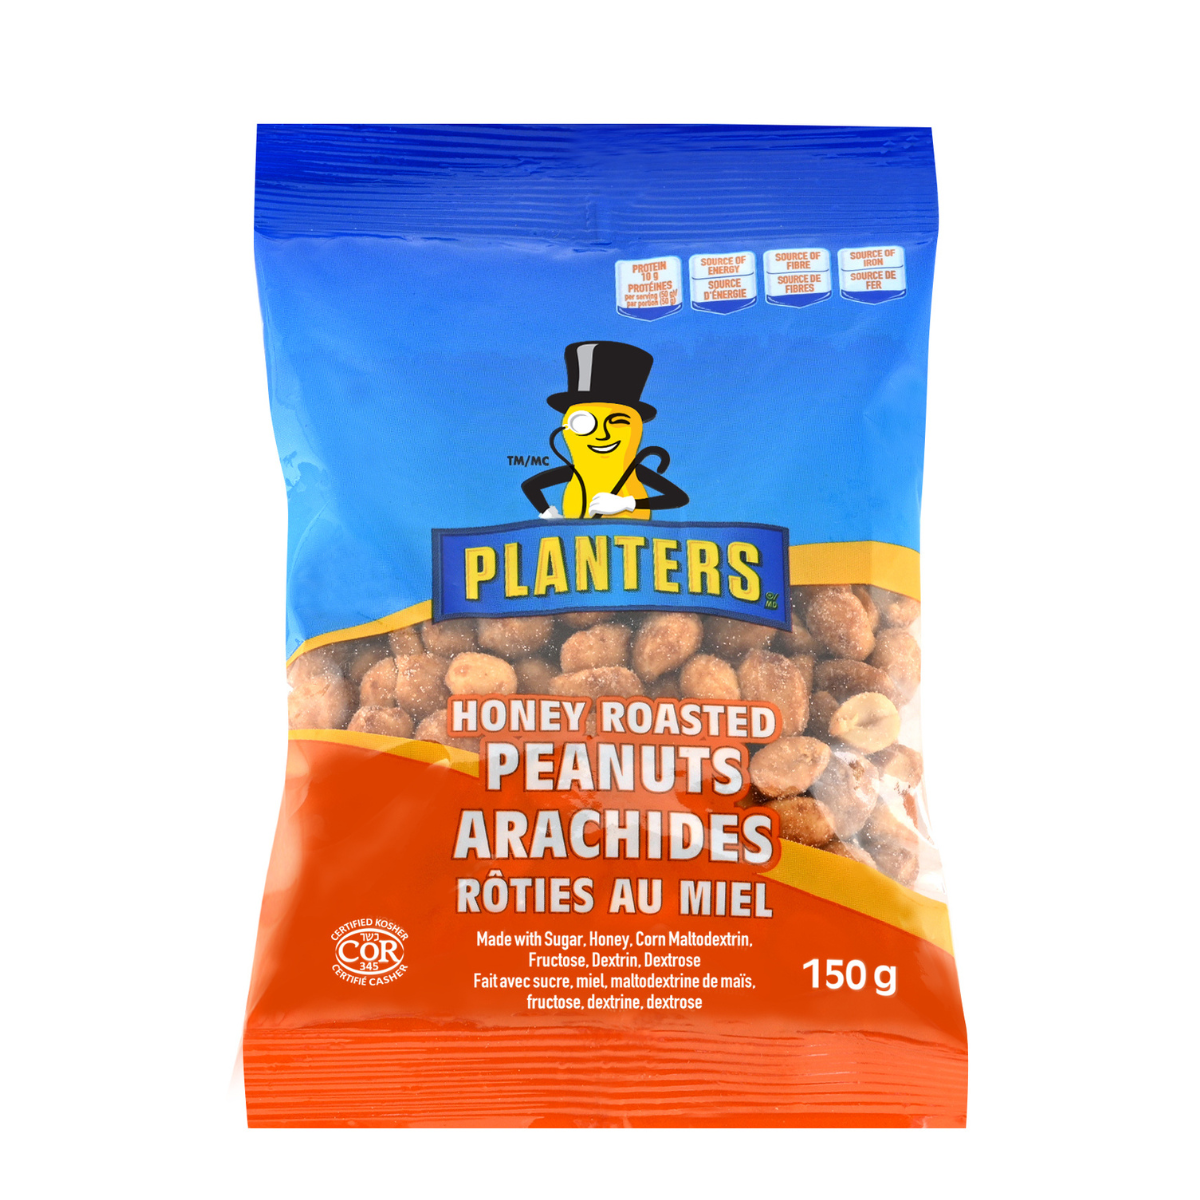 https://www.planterspeanuts.ca/wp-content/uploads/2017/12/honey-roasted.png